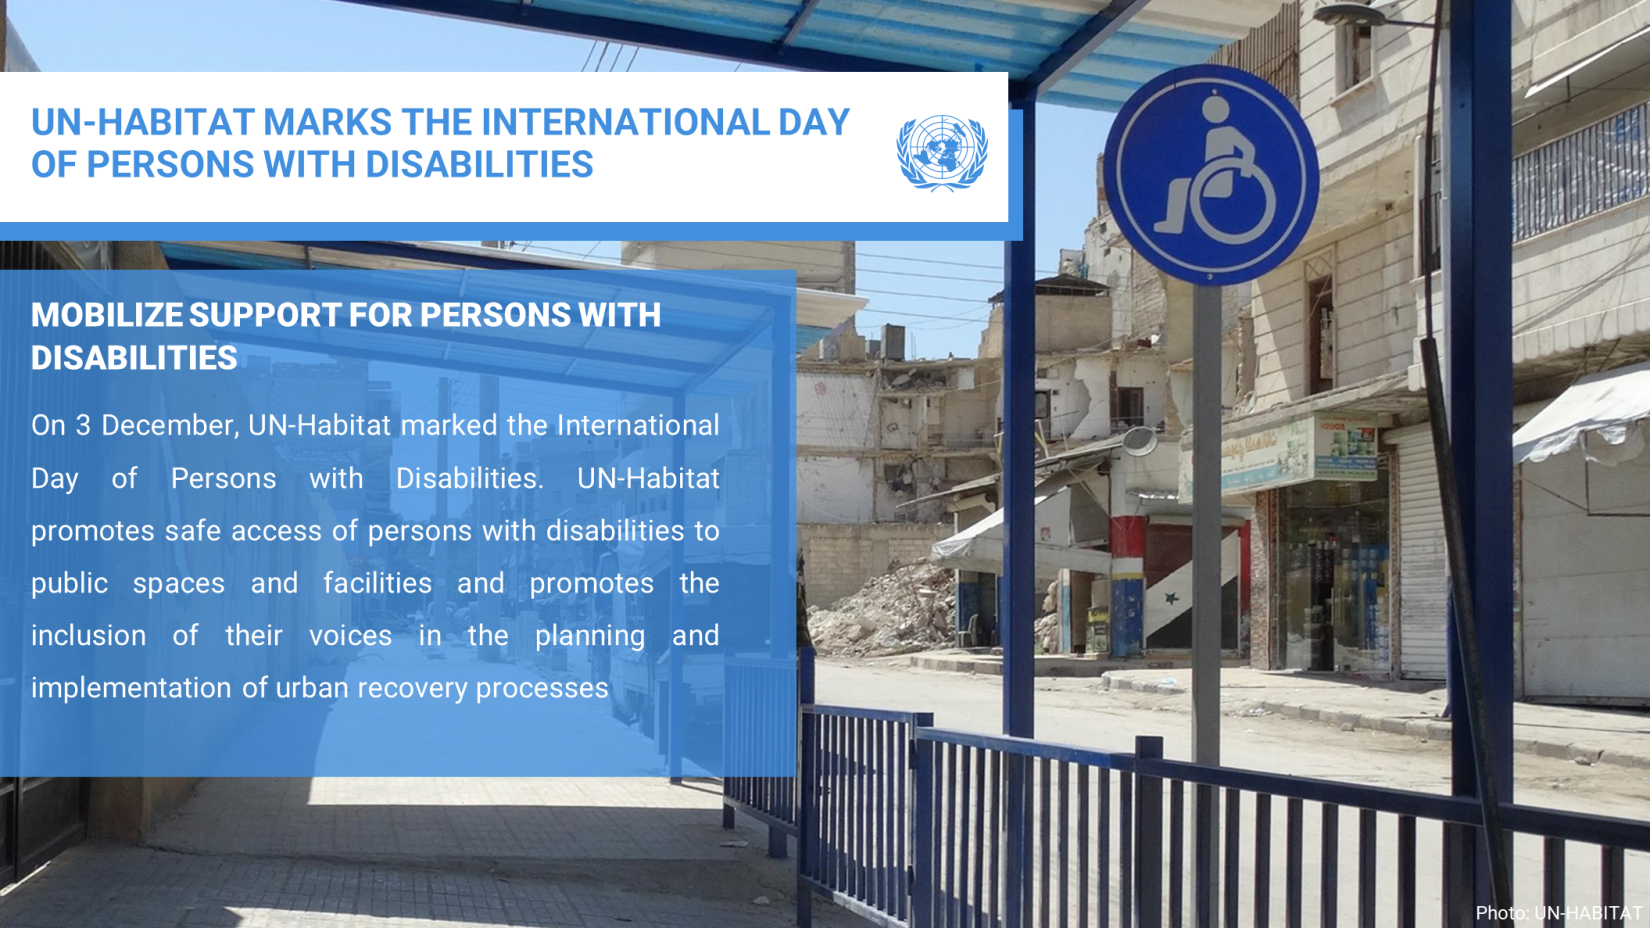 UN-Habitat MARKS THE INTERNATIONAL DAY OF PERSONS WITH DISABILITIES AND MOBILIZES SUPPORT FOR THE DIGNITY, RIGHTS, AND WELL-BEING OF PERSONS WITH DISABILITIES